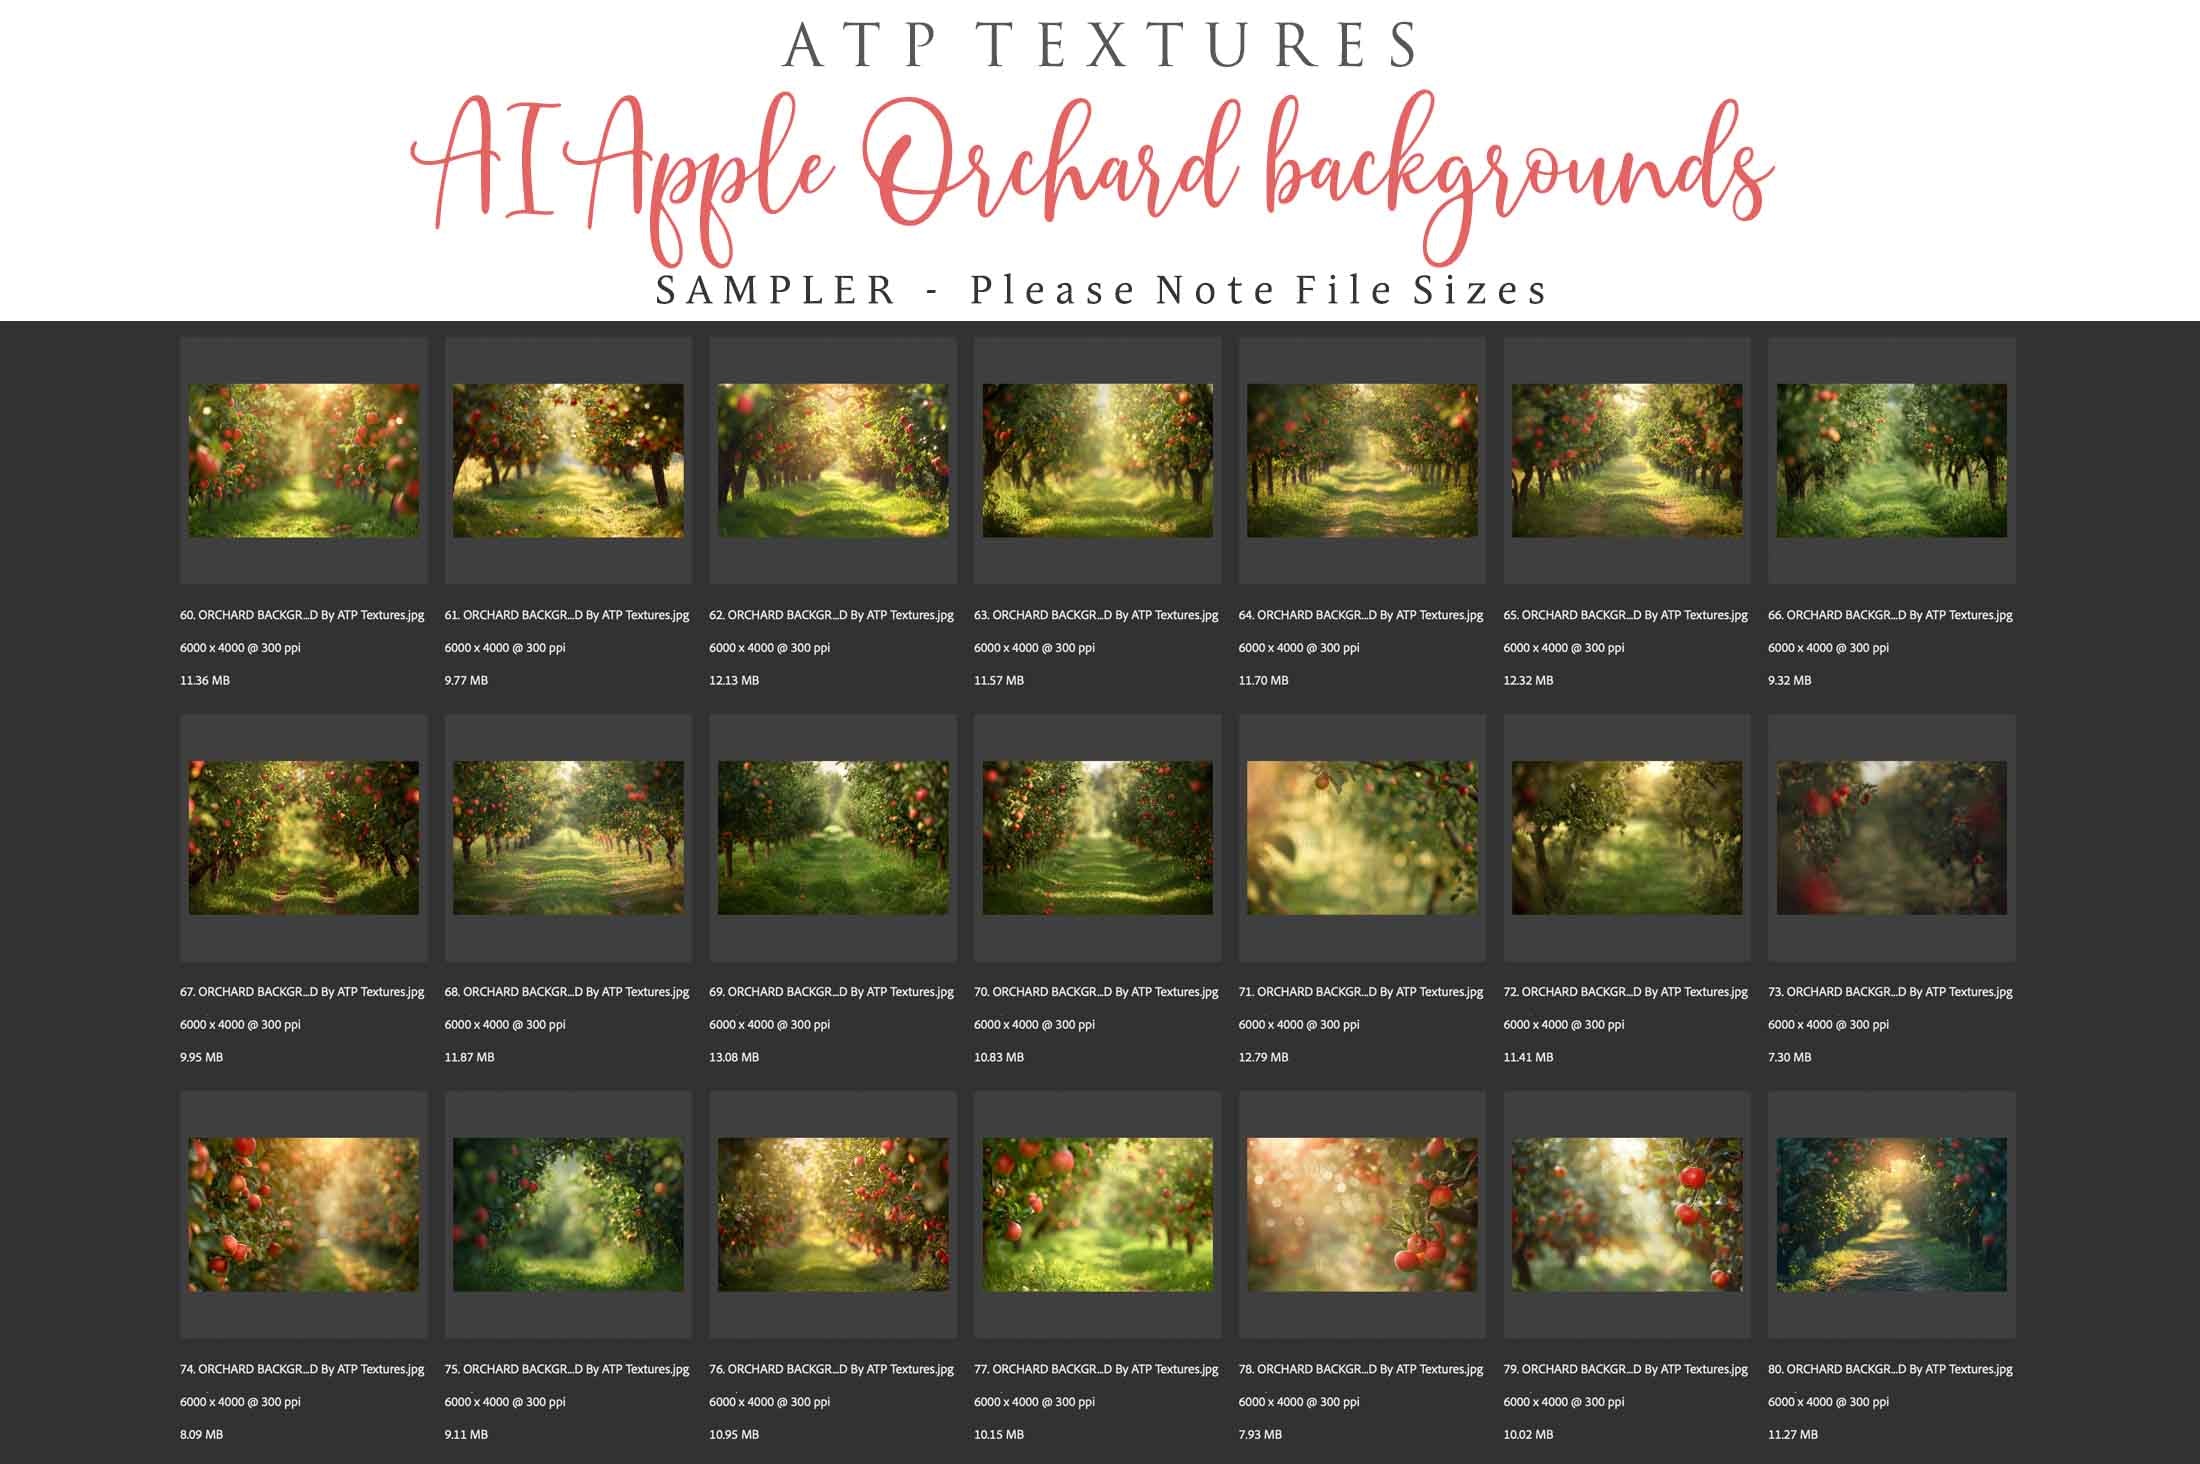 Apple Orchard Digital Background for Photographers. Fine Art Photo Backdrop. Add to your images for a dramatic sky effect. Each Digital file is 300dpi. These are in Jpeg format and high resolution. Find more at ATP Textures store.